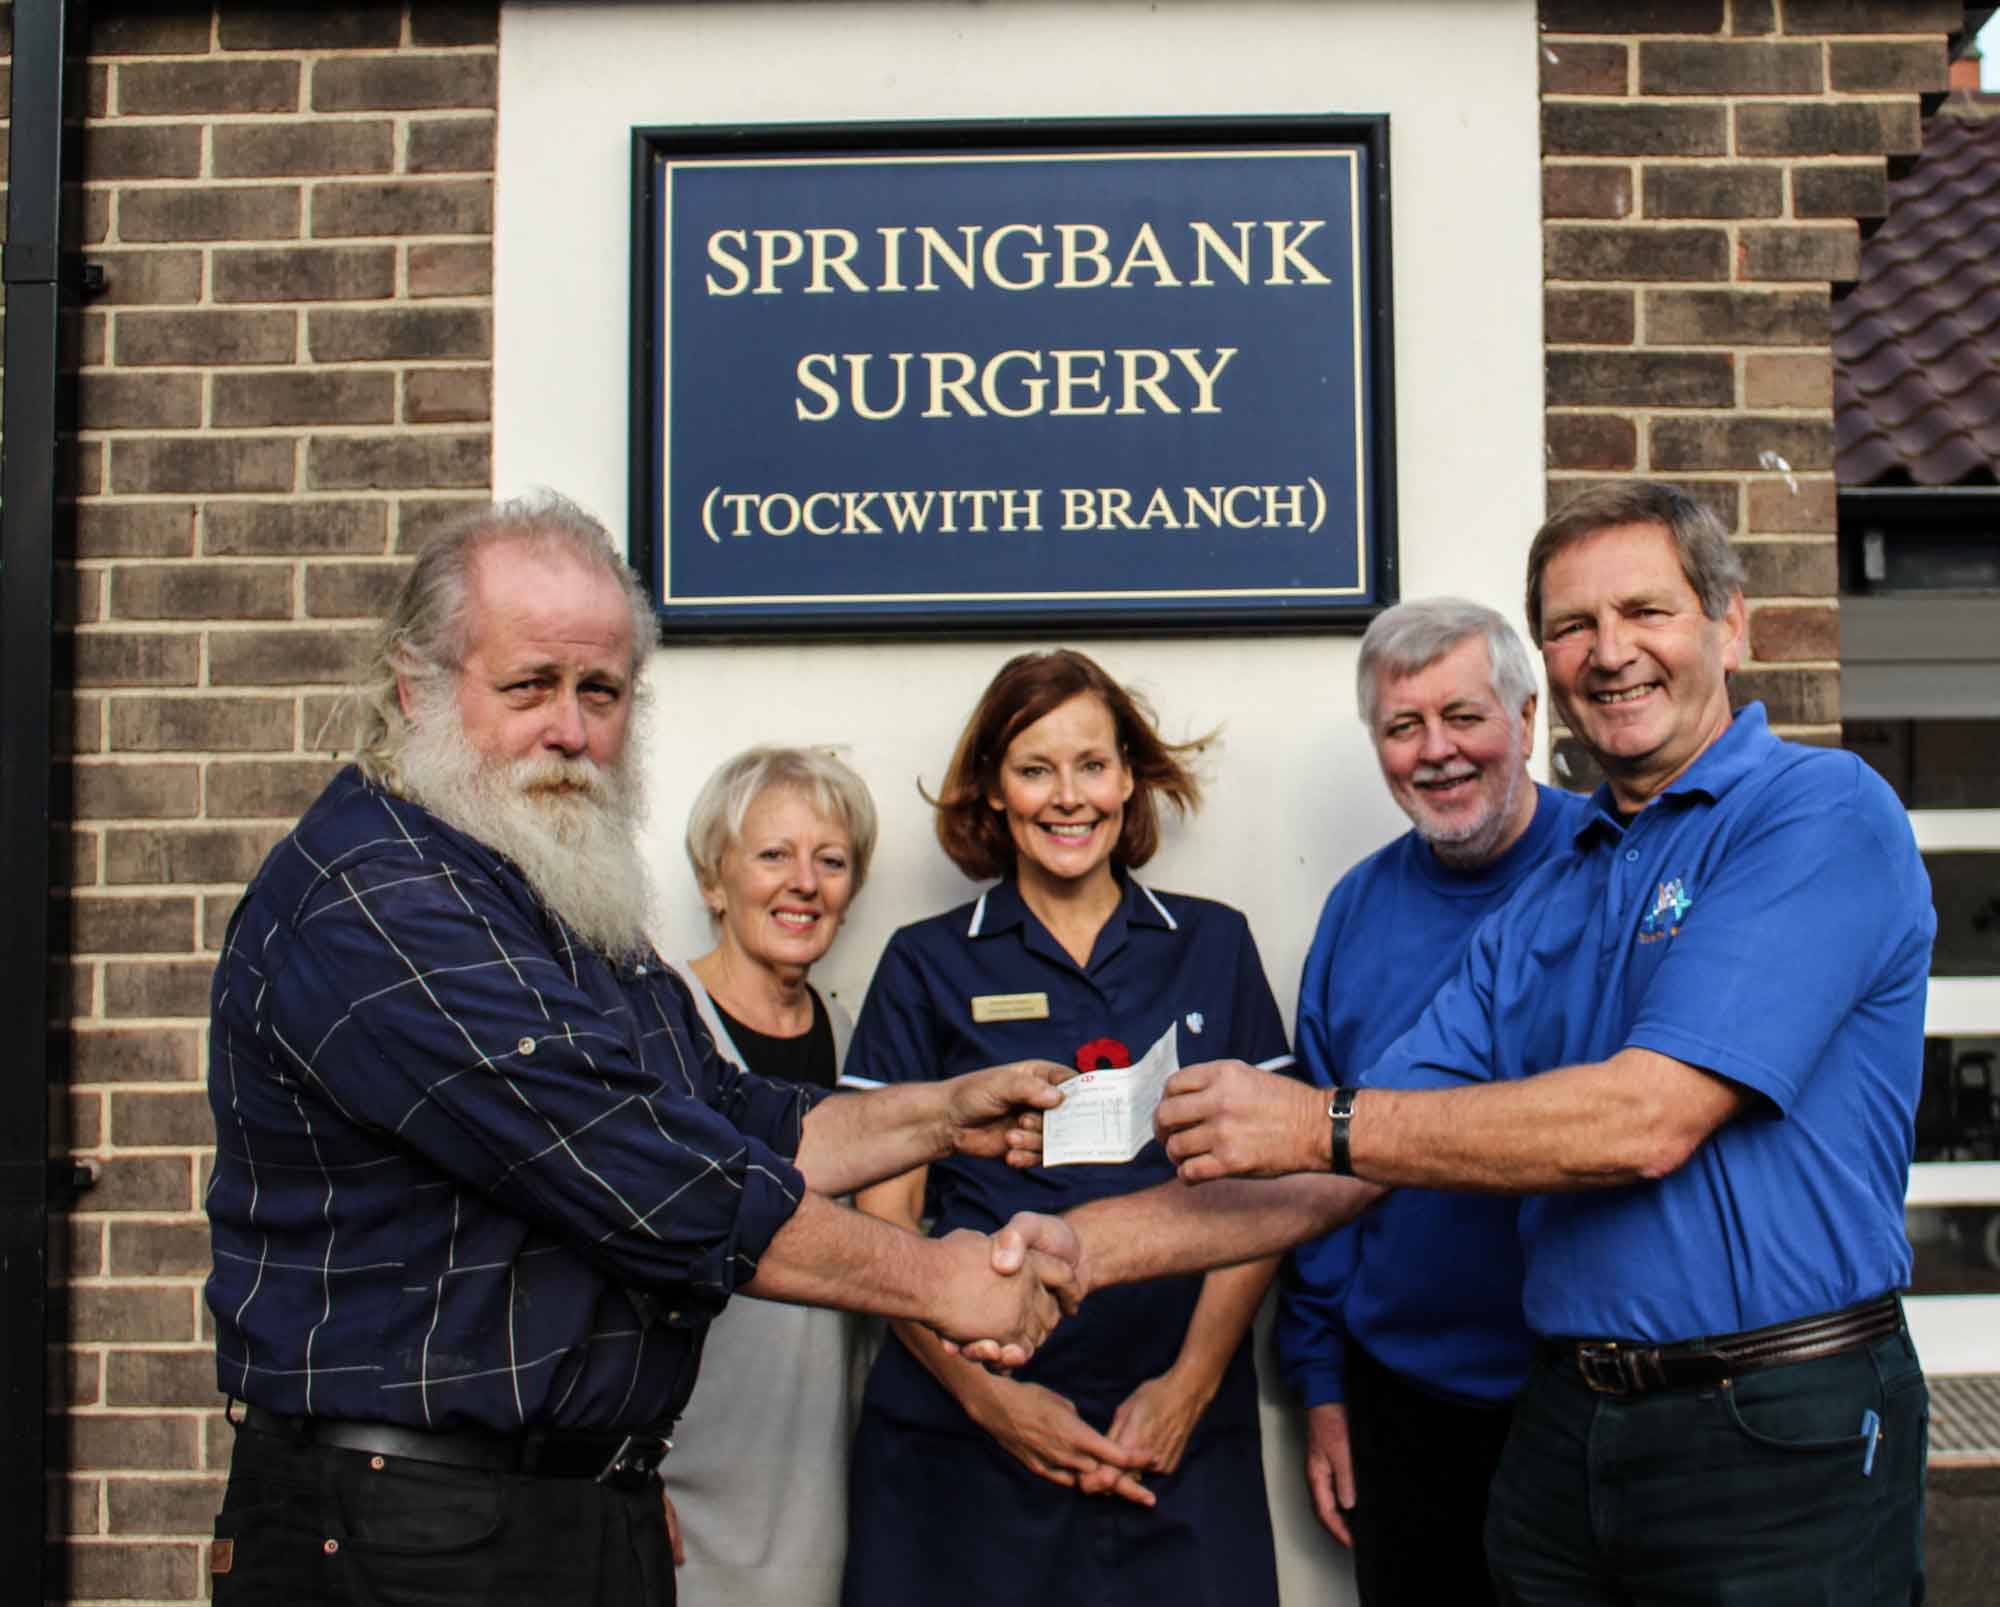 Arnold Warneken, chair of the Springbank health patient group committee, committee member Jane Bannan, and Tockwith surgery nurse Christine Edmond receive a cheque for £1,000 from TADAS treasurer Malcolm Barrett and co-chairman Sam Blacker